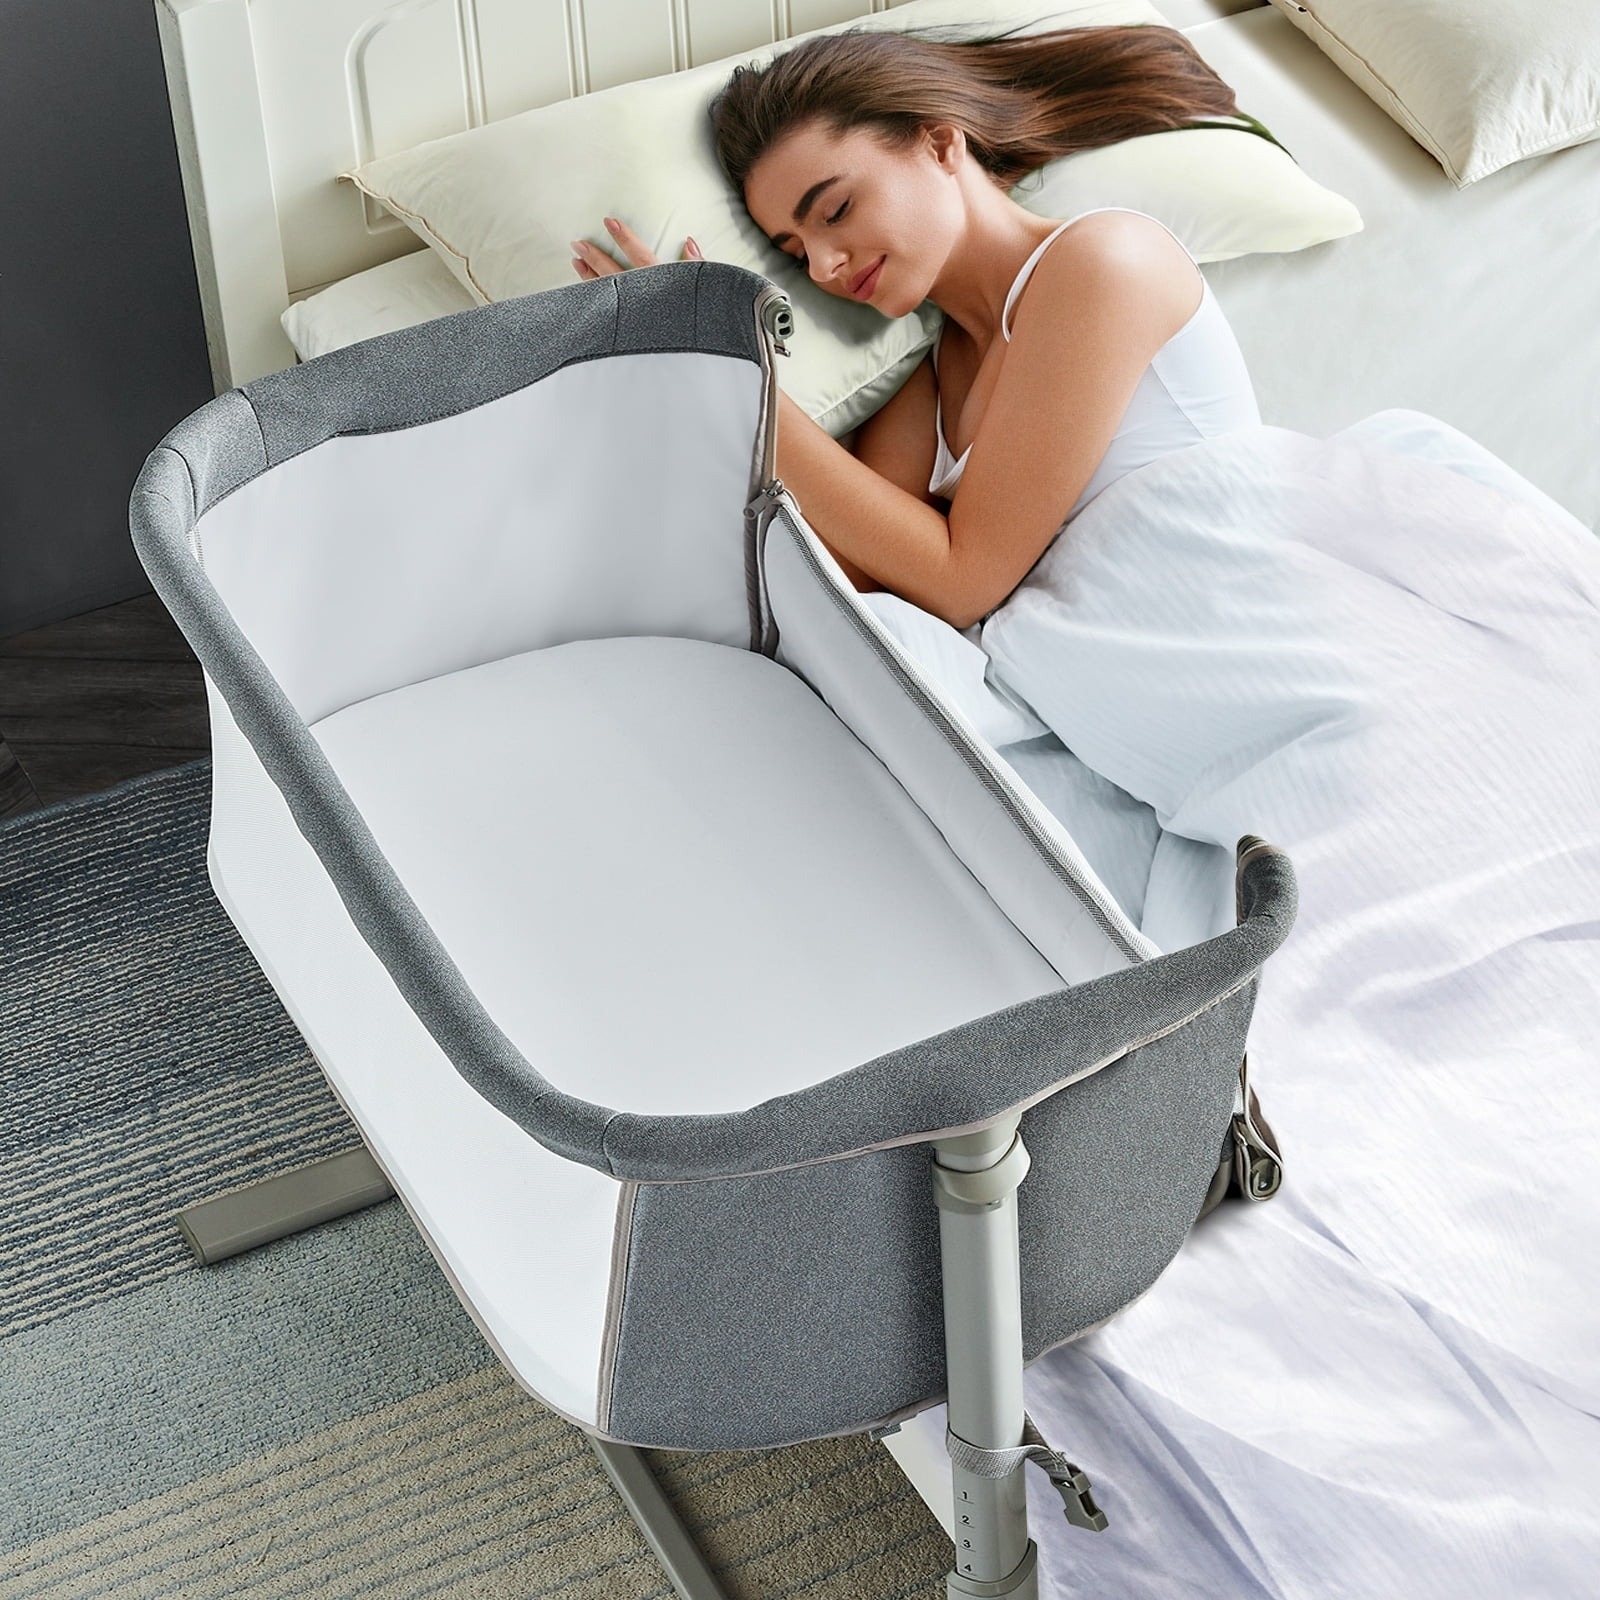 a model sleeping in bed next to the unzippered bassinet